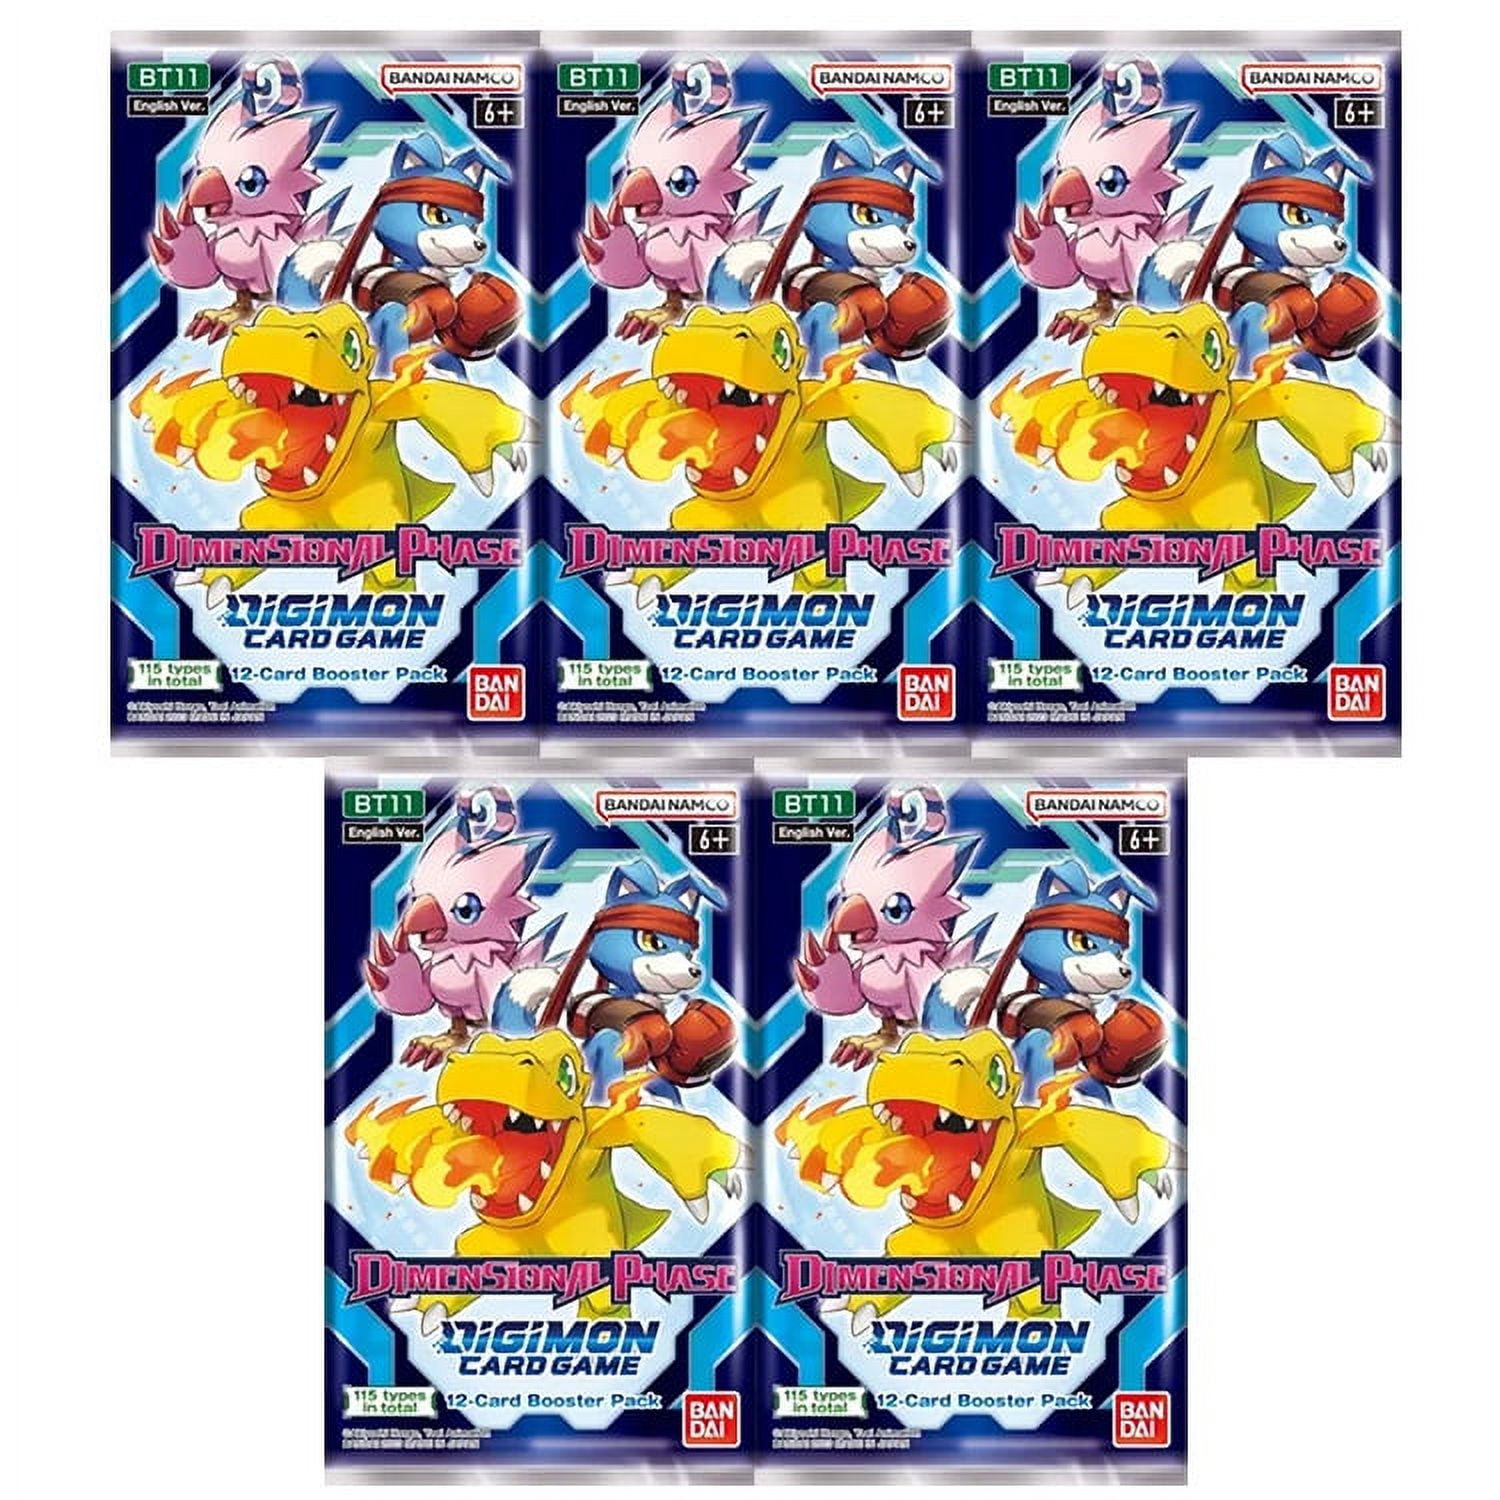 Digimon English Trading Card Game - Dimensional Phase BT11 - BOOSTER PACKS  (5 Pack Lot)